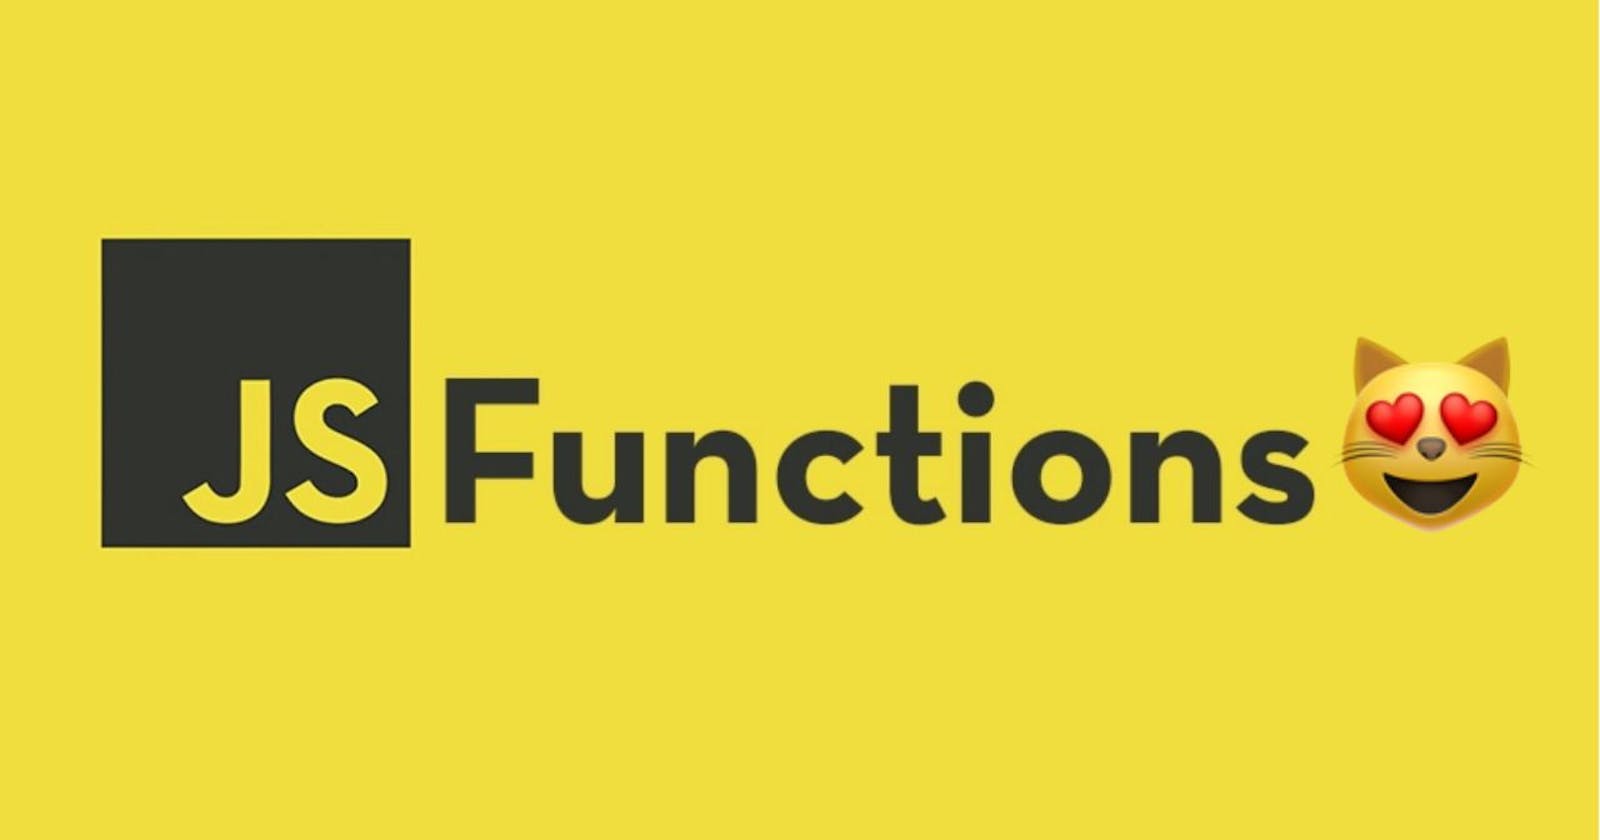 Functions are the heart of Javascript 💘 !!